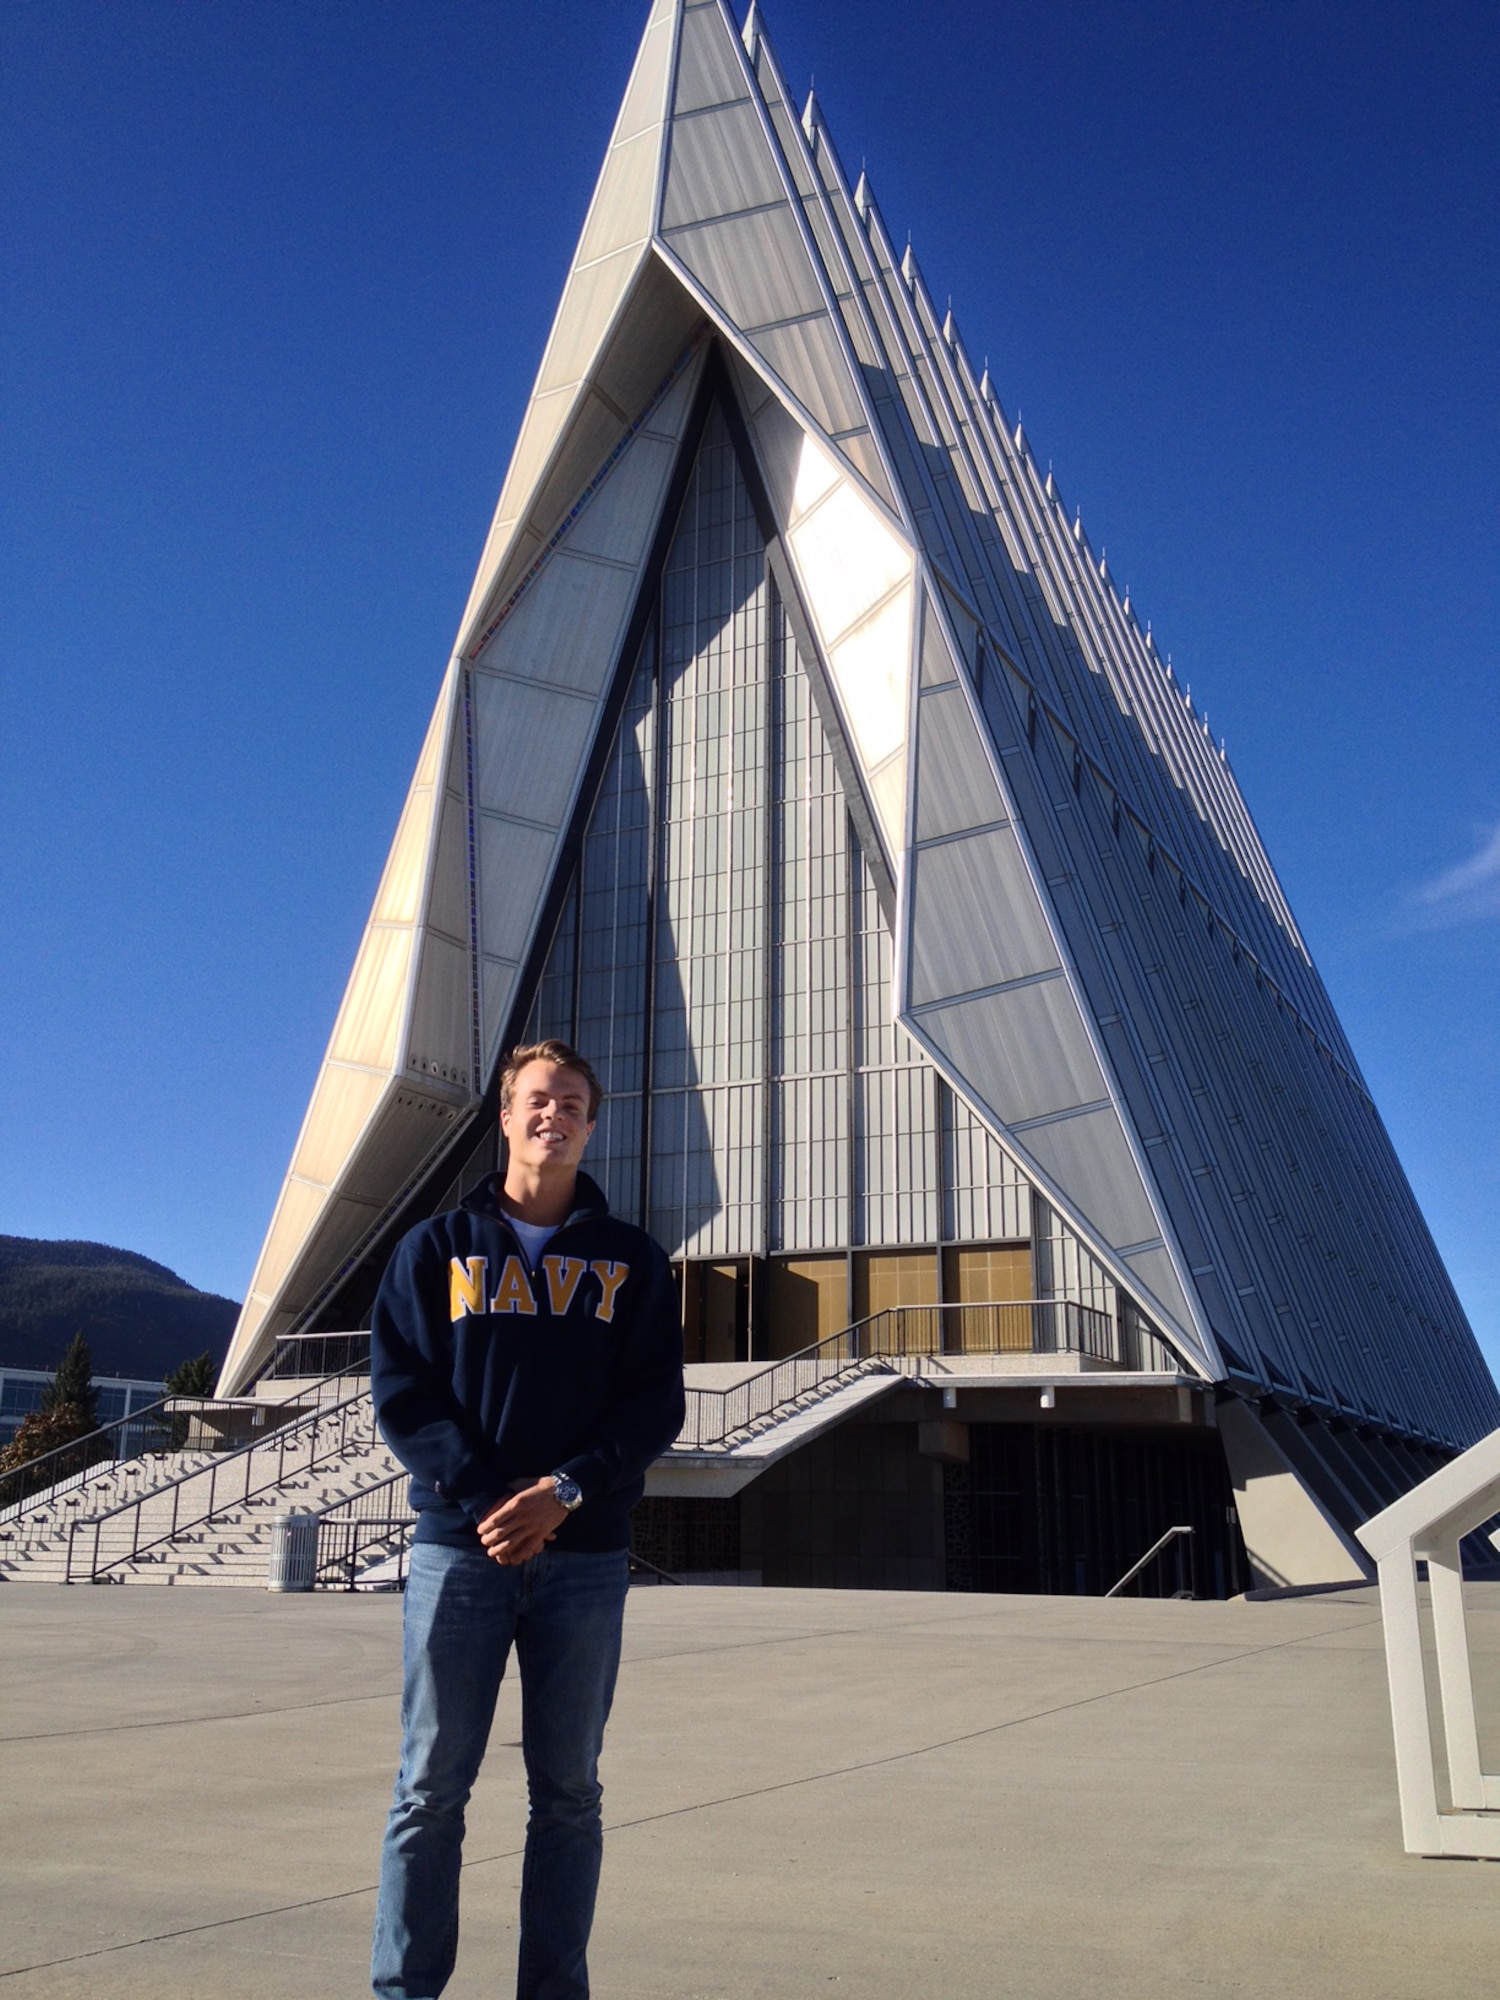 Then-prospective cadet, Ben Anderson, stands outside the United States Air Force Academy Cadet Chapel during a tour, Oct. 7, 2013. (Courtesy photo)